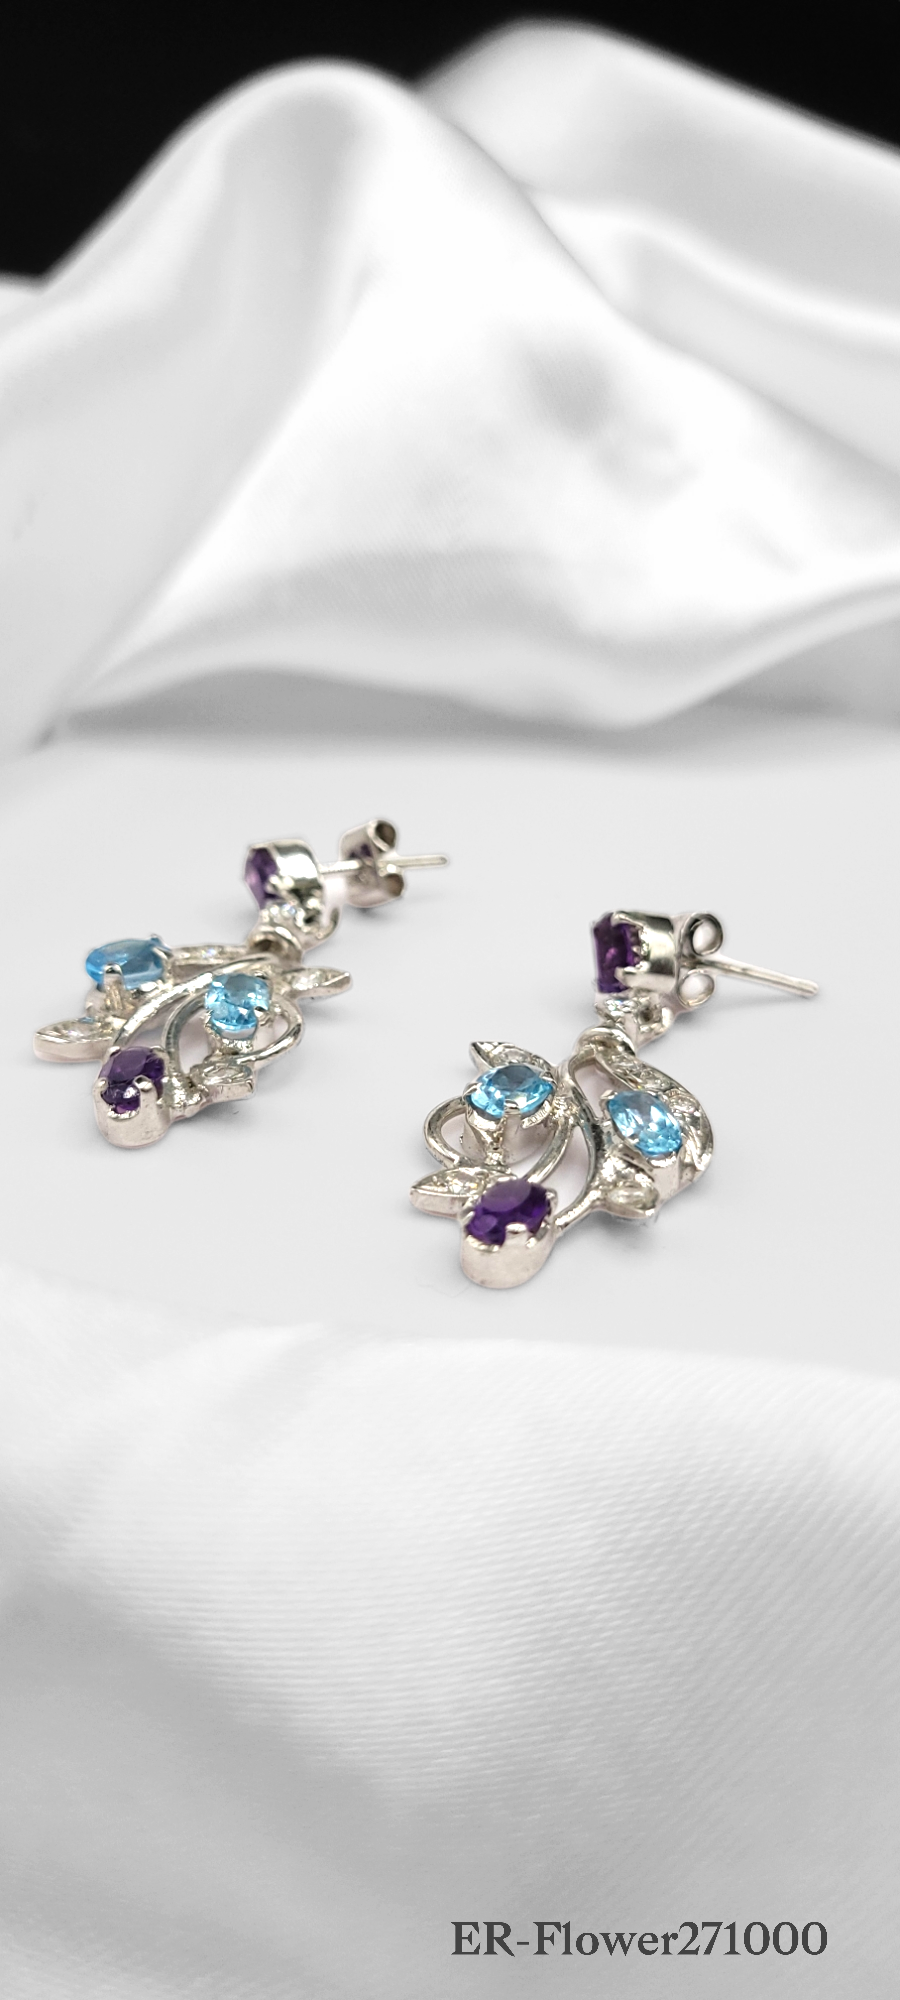 BEAUTIFUL FLOWER DESIGN EARRINGS ON STERLING SILVER ENCRUSTED WITH AMETHYST, CZ AND BLUE TOPAZ STONES. ONE OF A KIND.